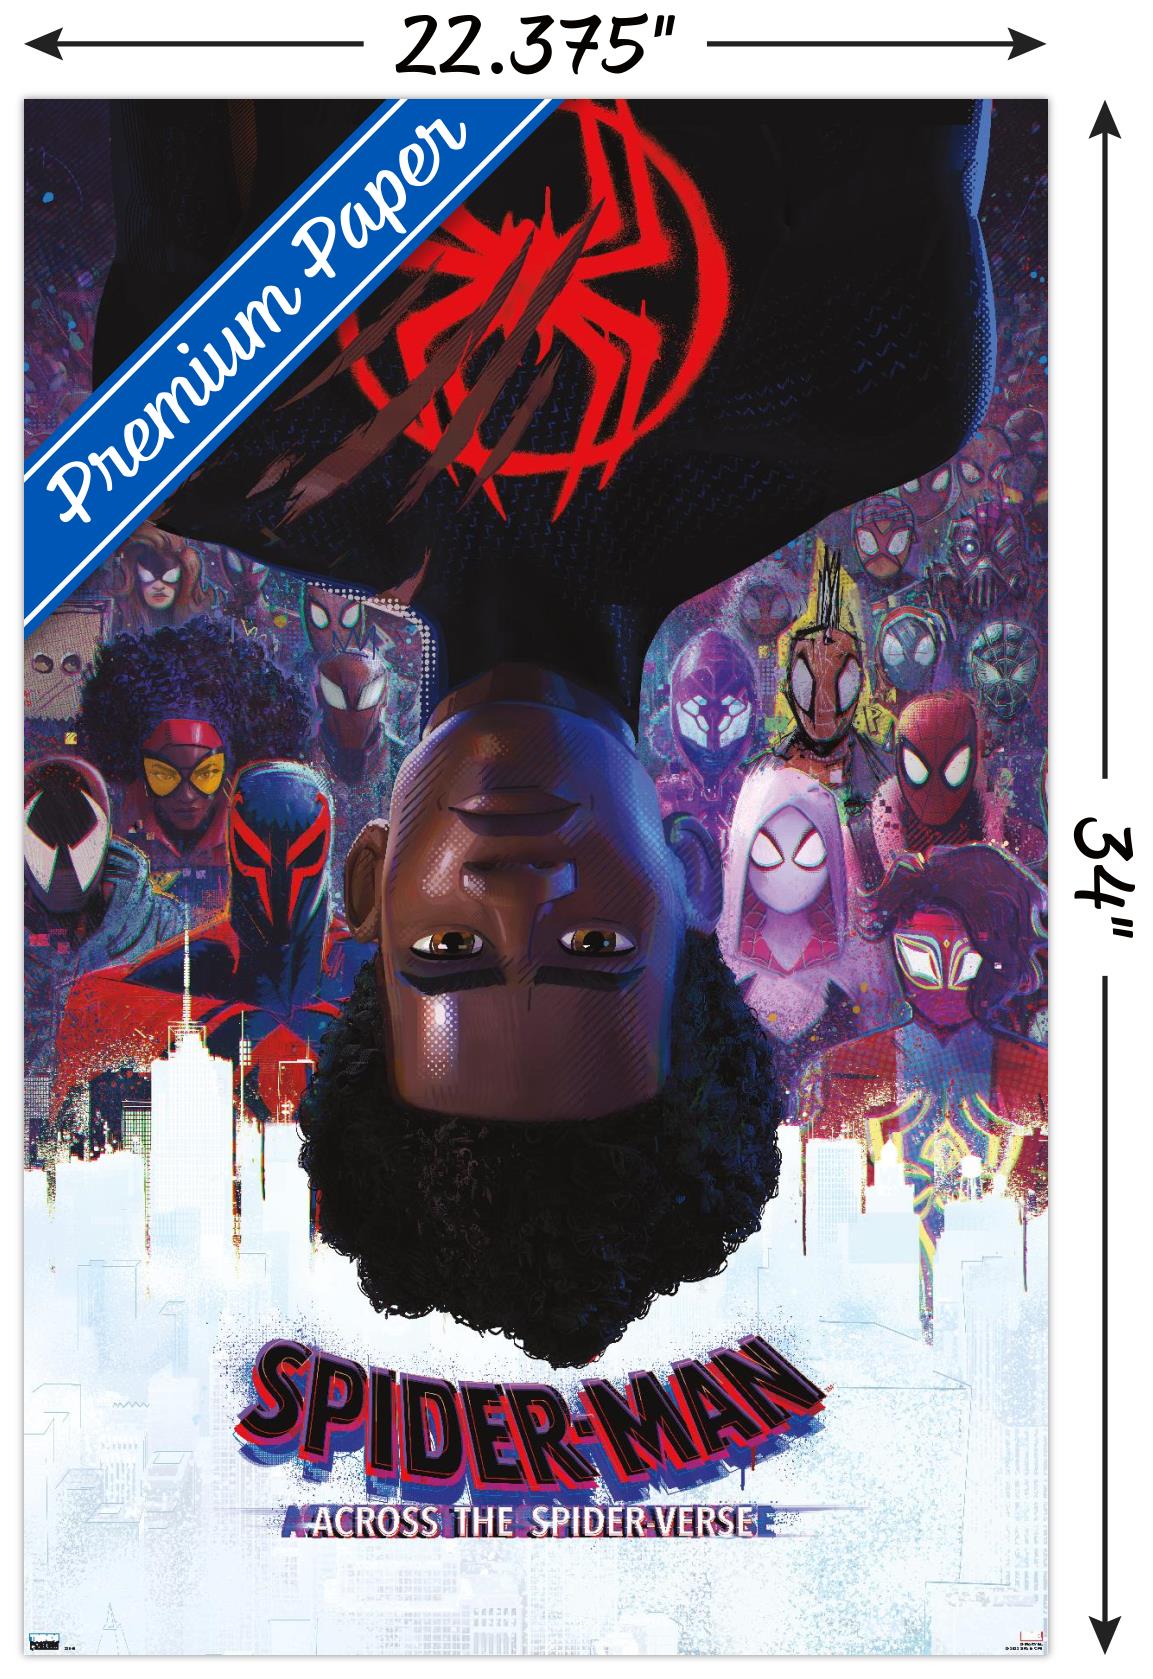 Marvel Spider-Man: Across the Spider-Verse - Official One Sheet